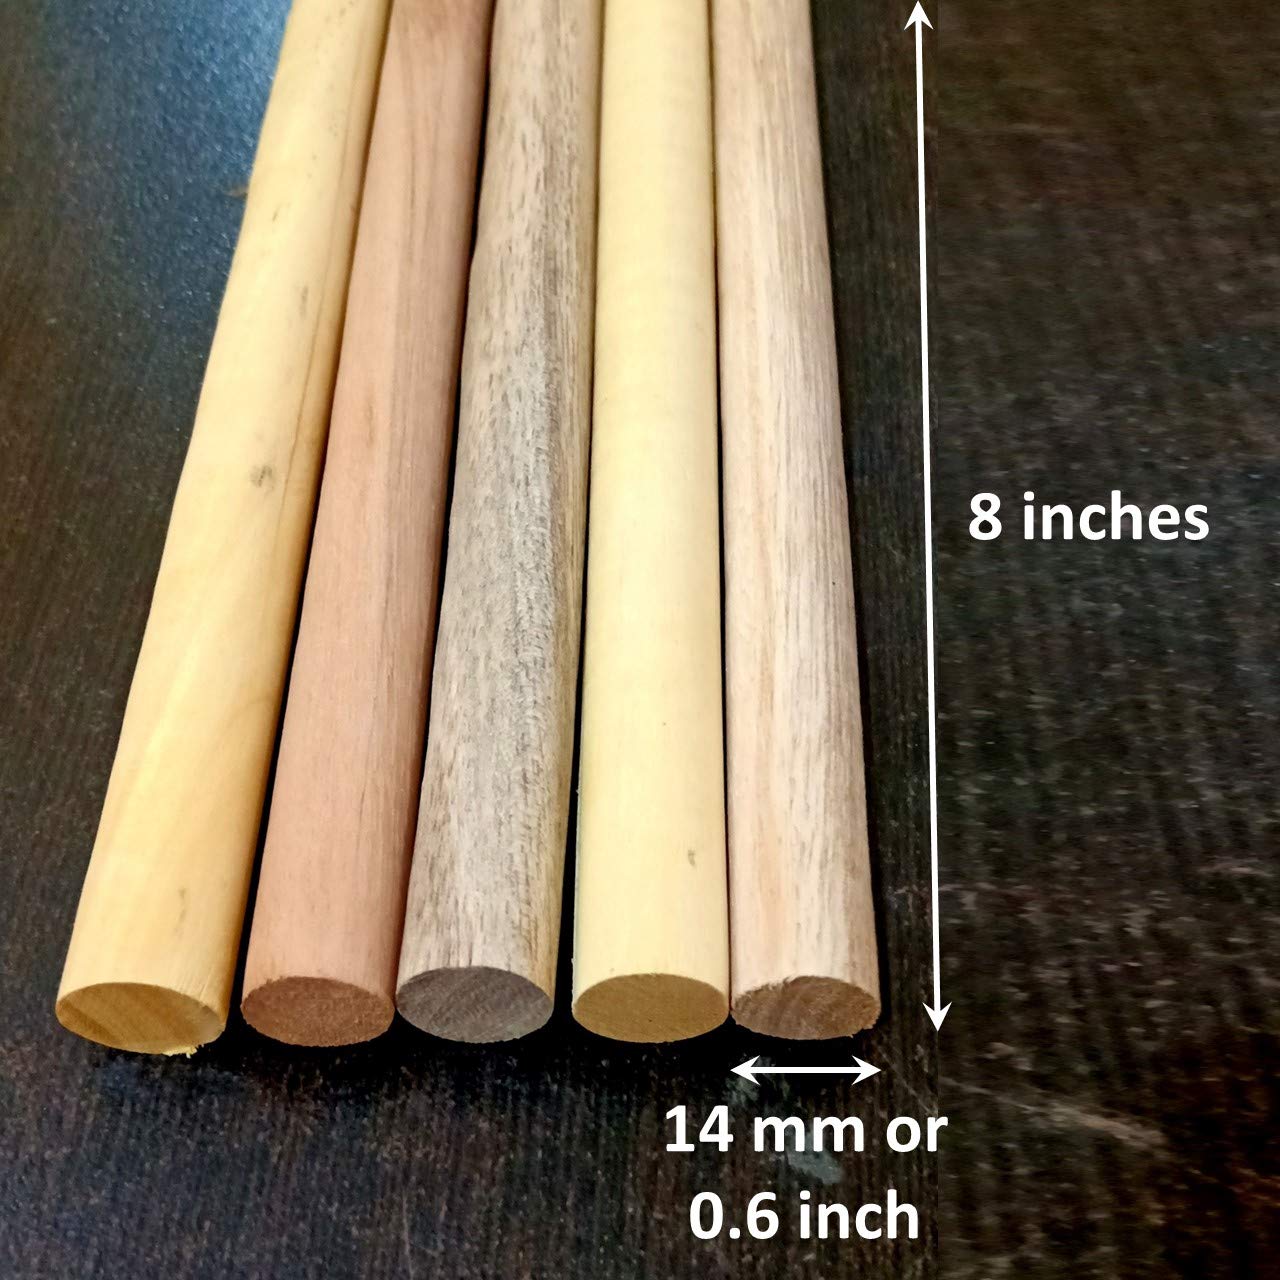 Wooden Dowel Rods Craft Supplies freeshipping - Ecofynd